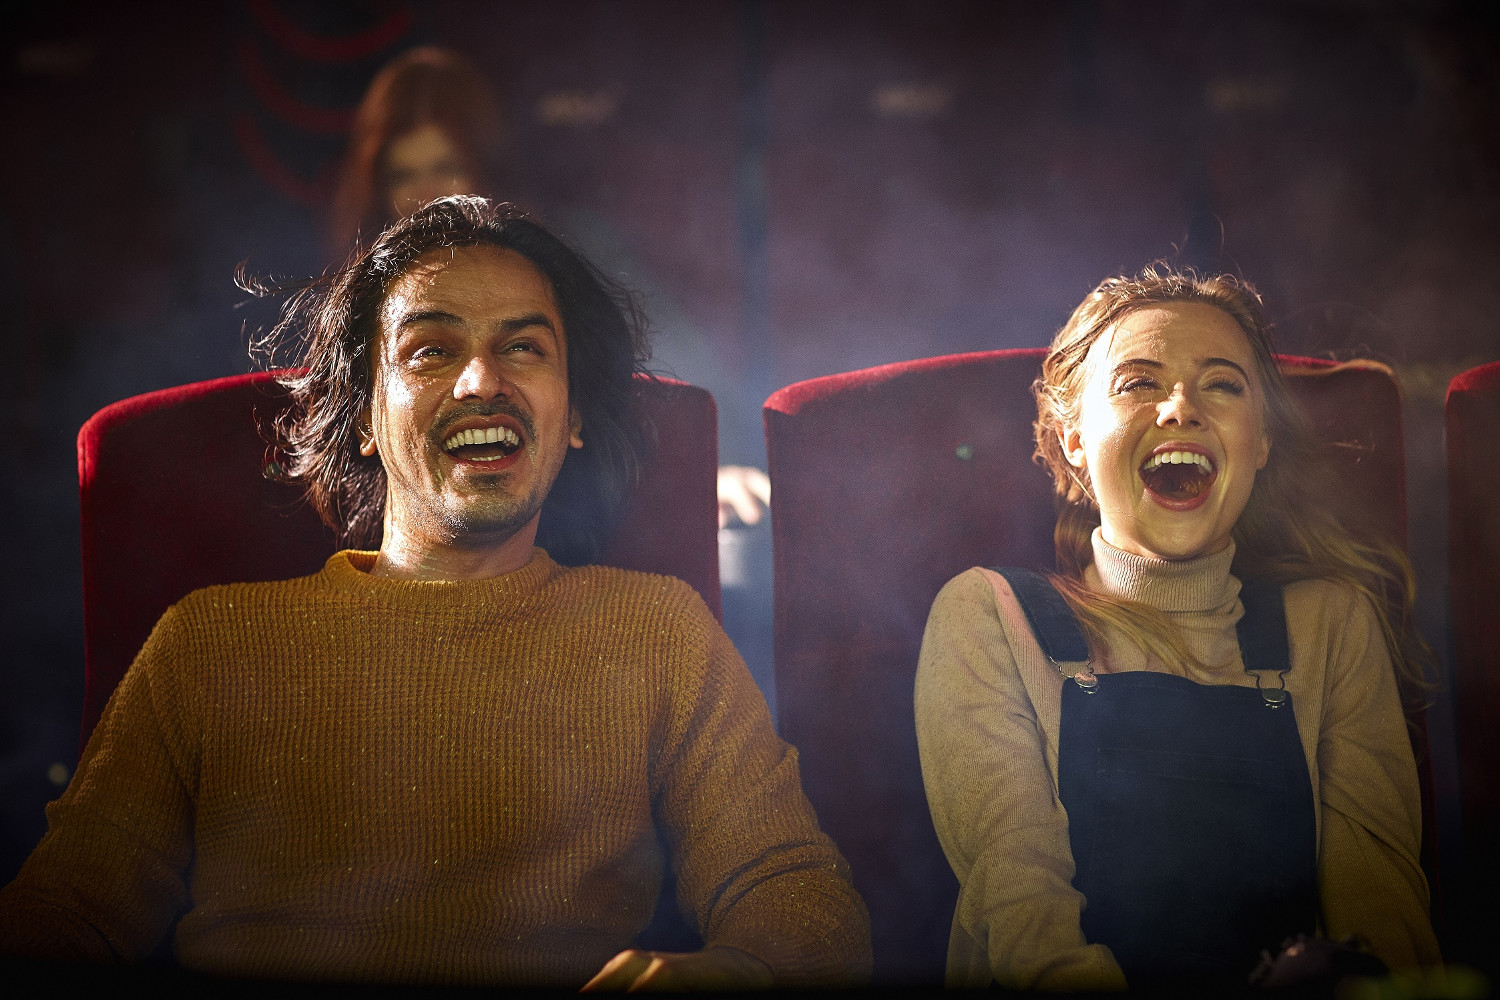 4DX cinema coming to Middlesbrough